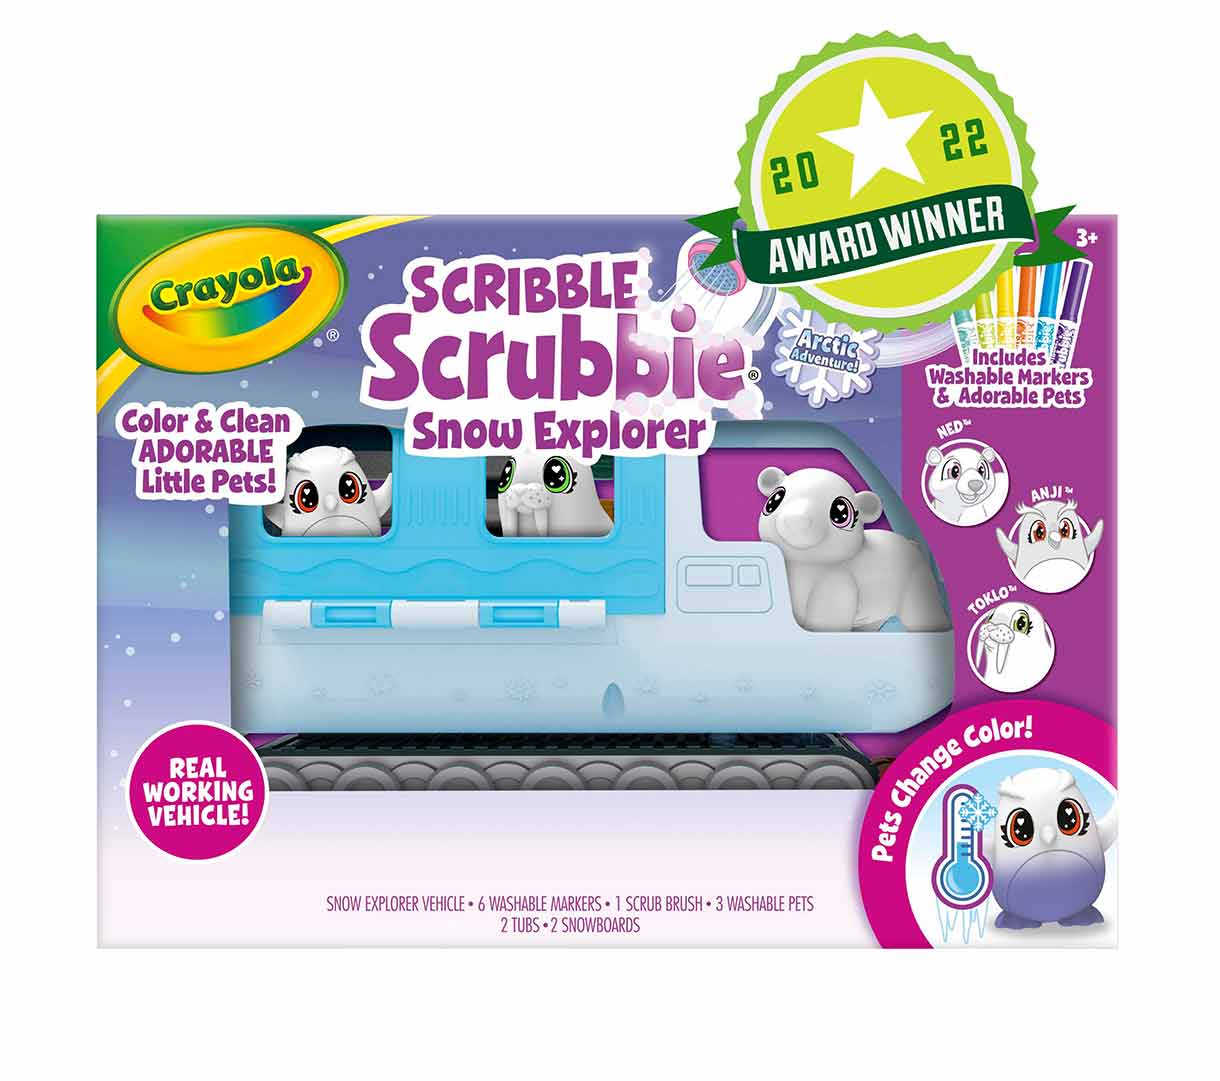 Crayola Scribble Scrubbie Pets Marker Set, 24 Washable Markers for Kids, Gifts for Boys & Girls [ Exclusive]